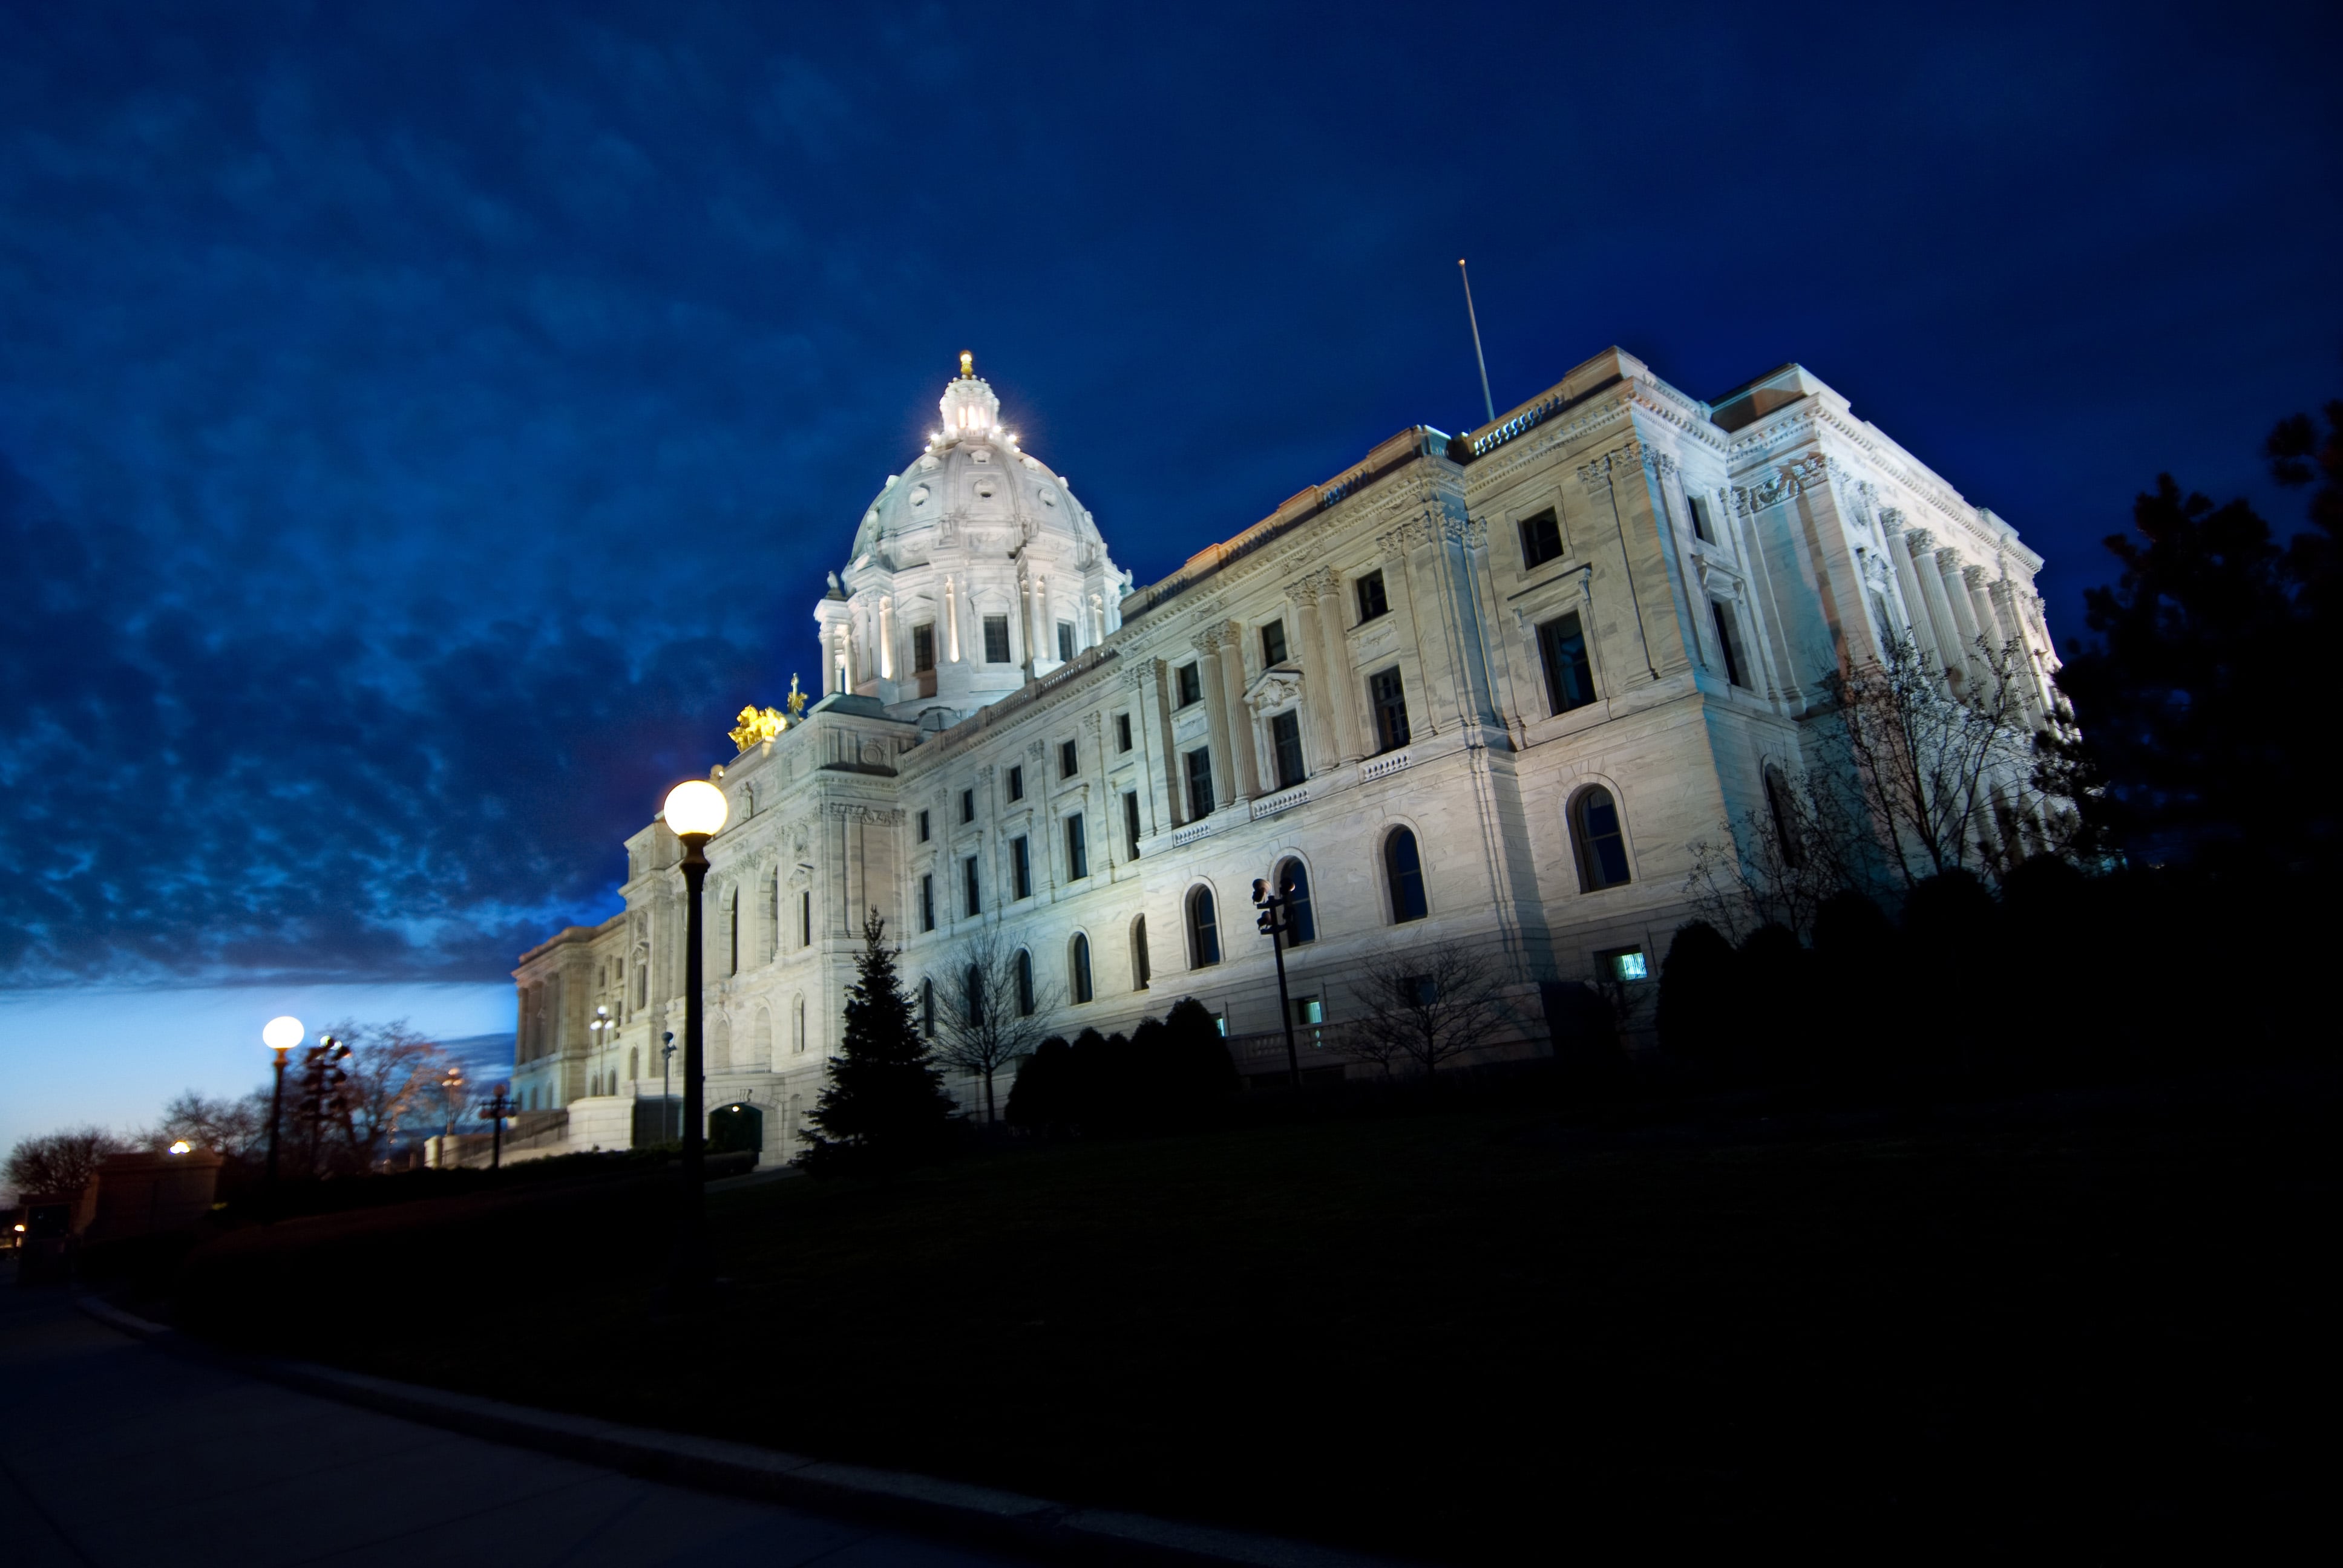 Dramatic night photograph of the Minnesota State Capitol building